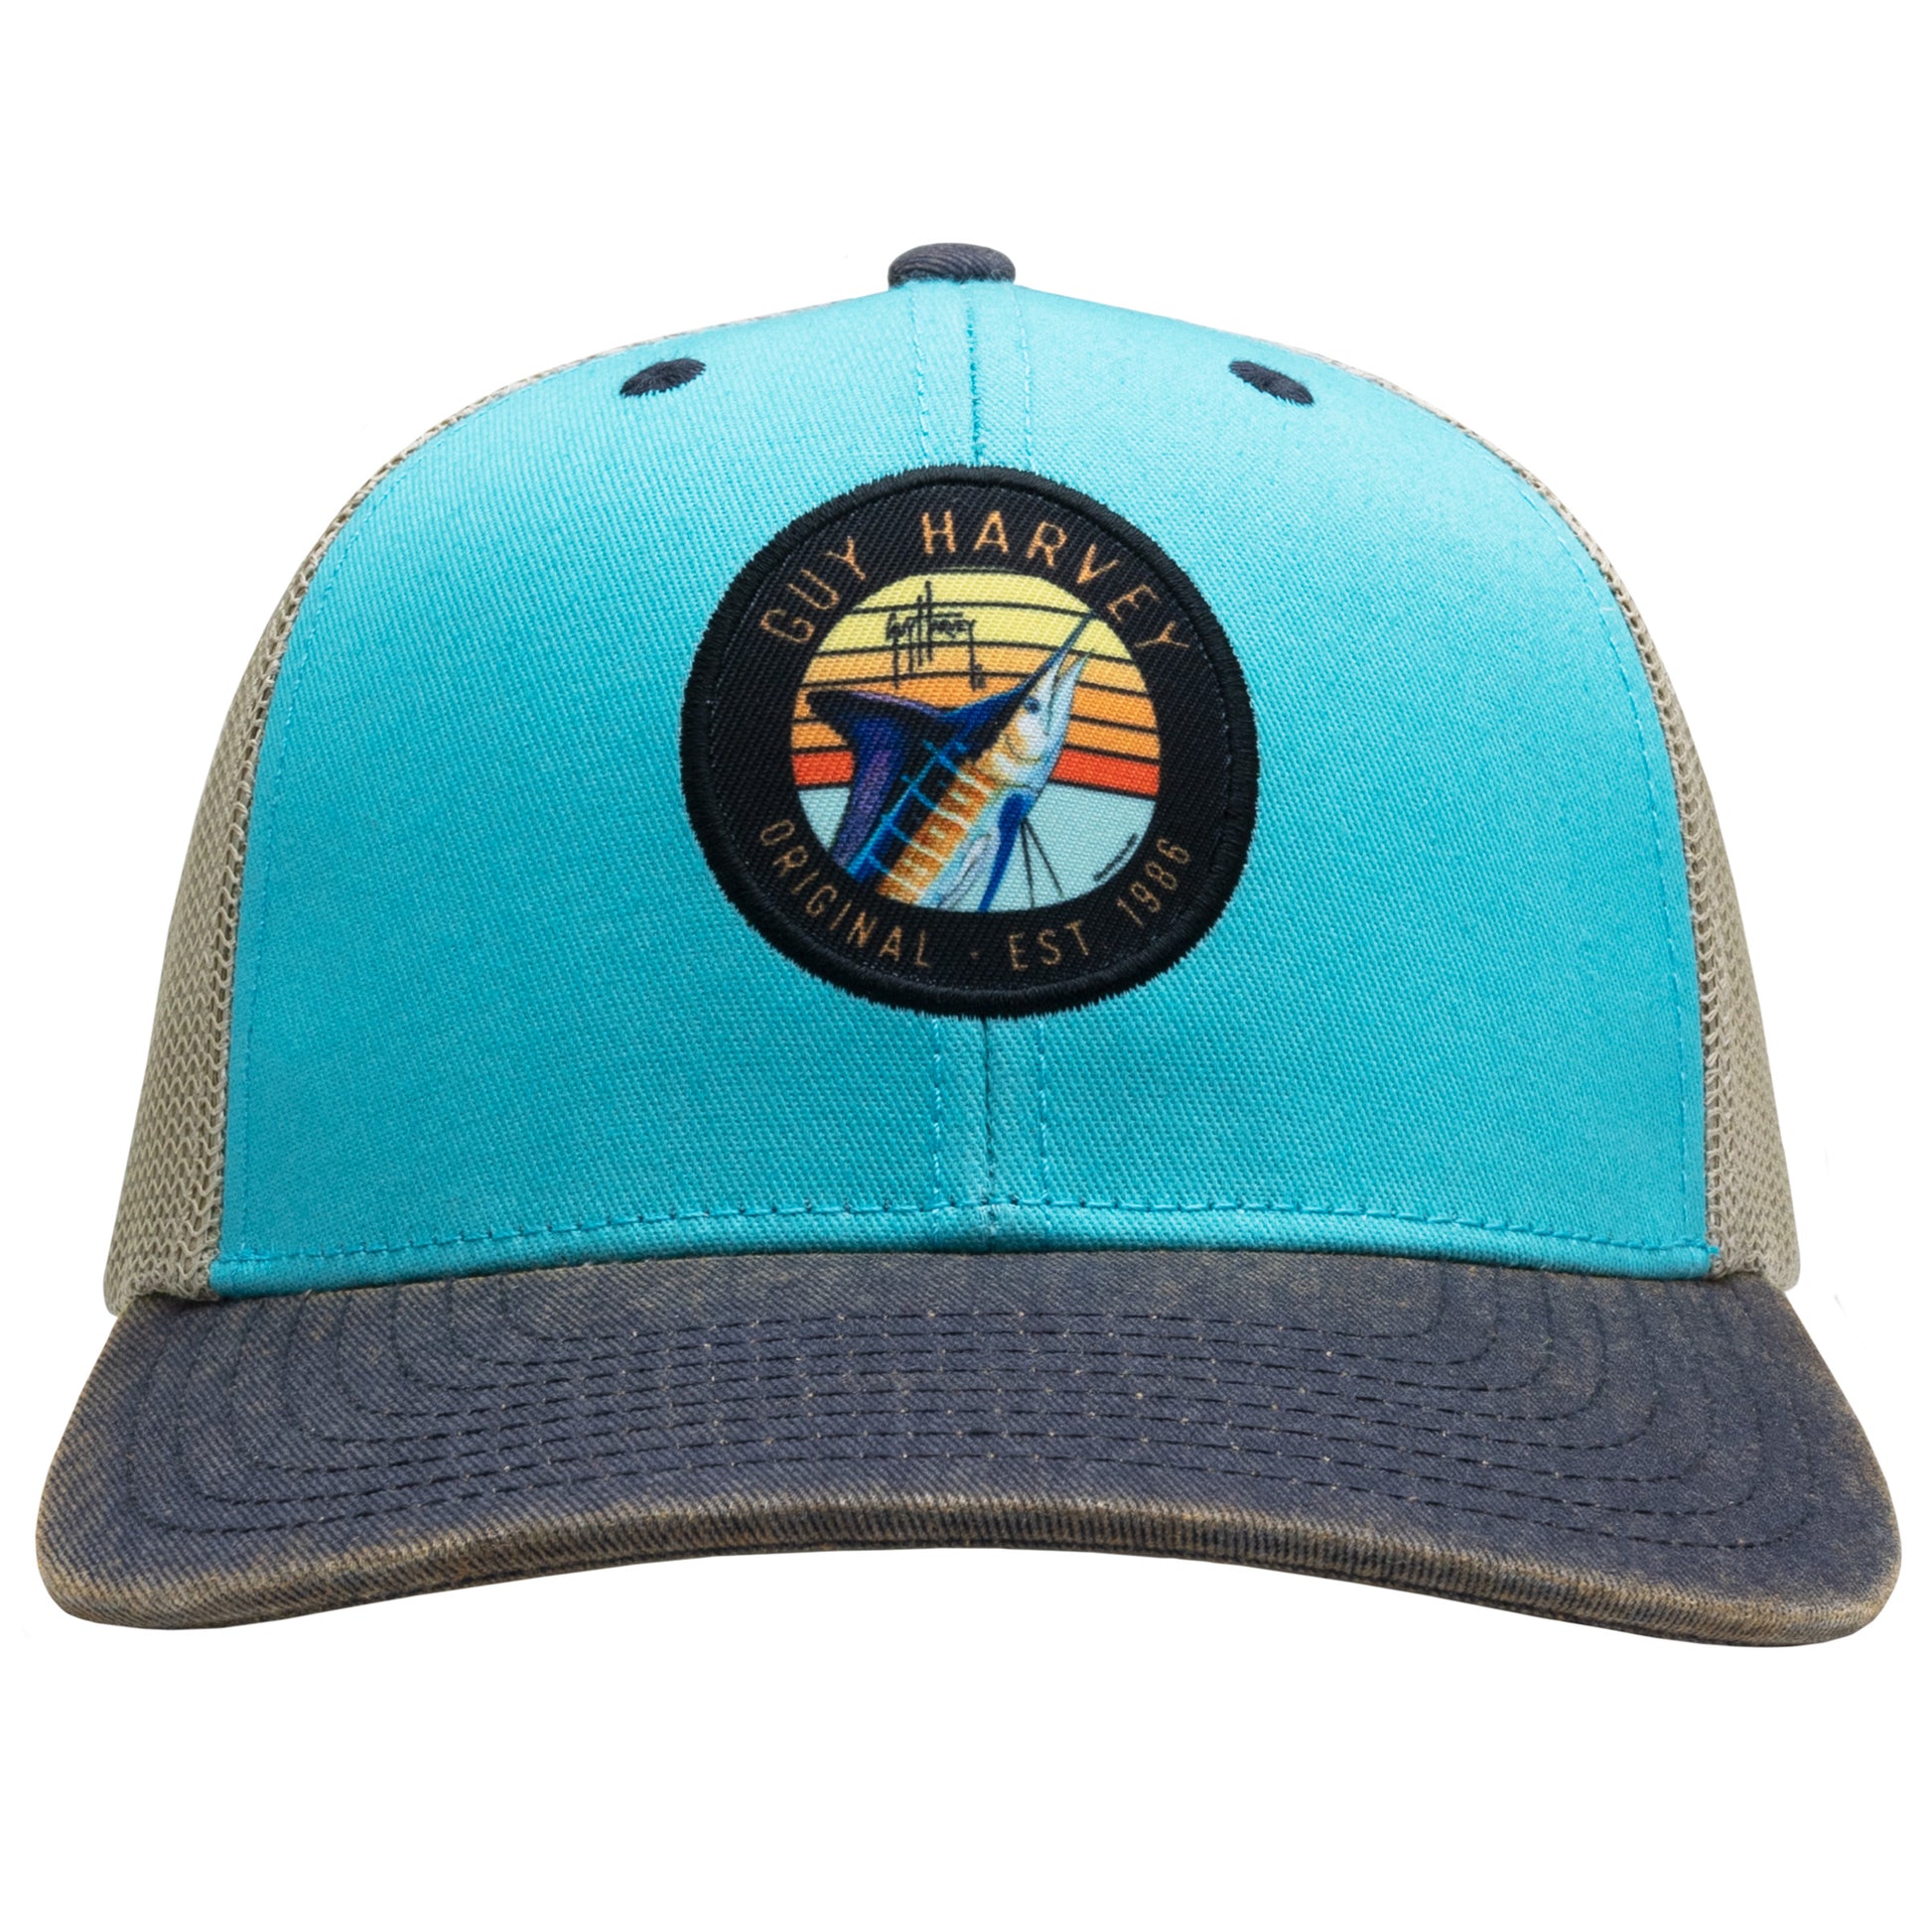 GH Sunset Patch Mesh Trucker Hat View 3